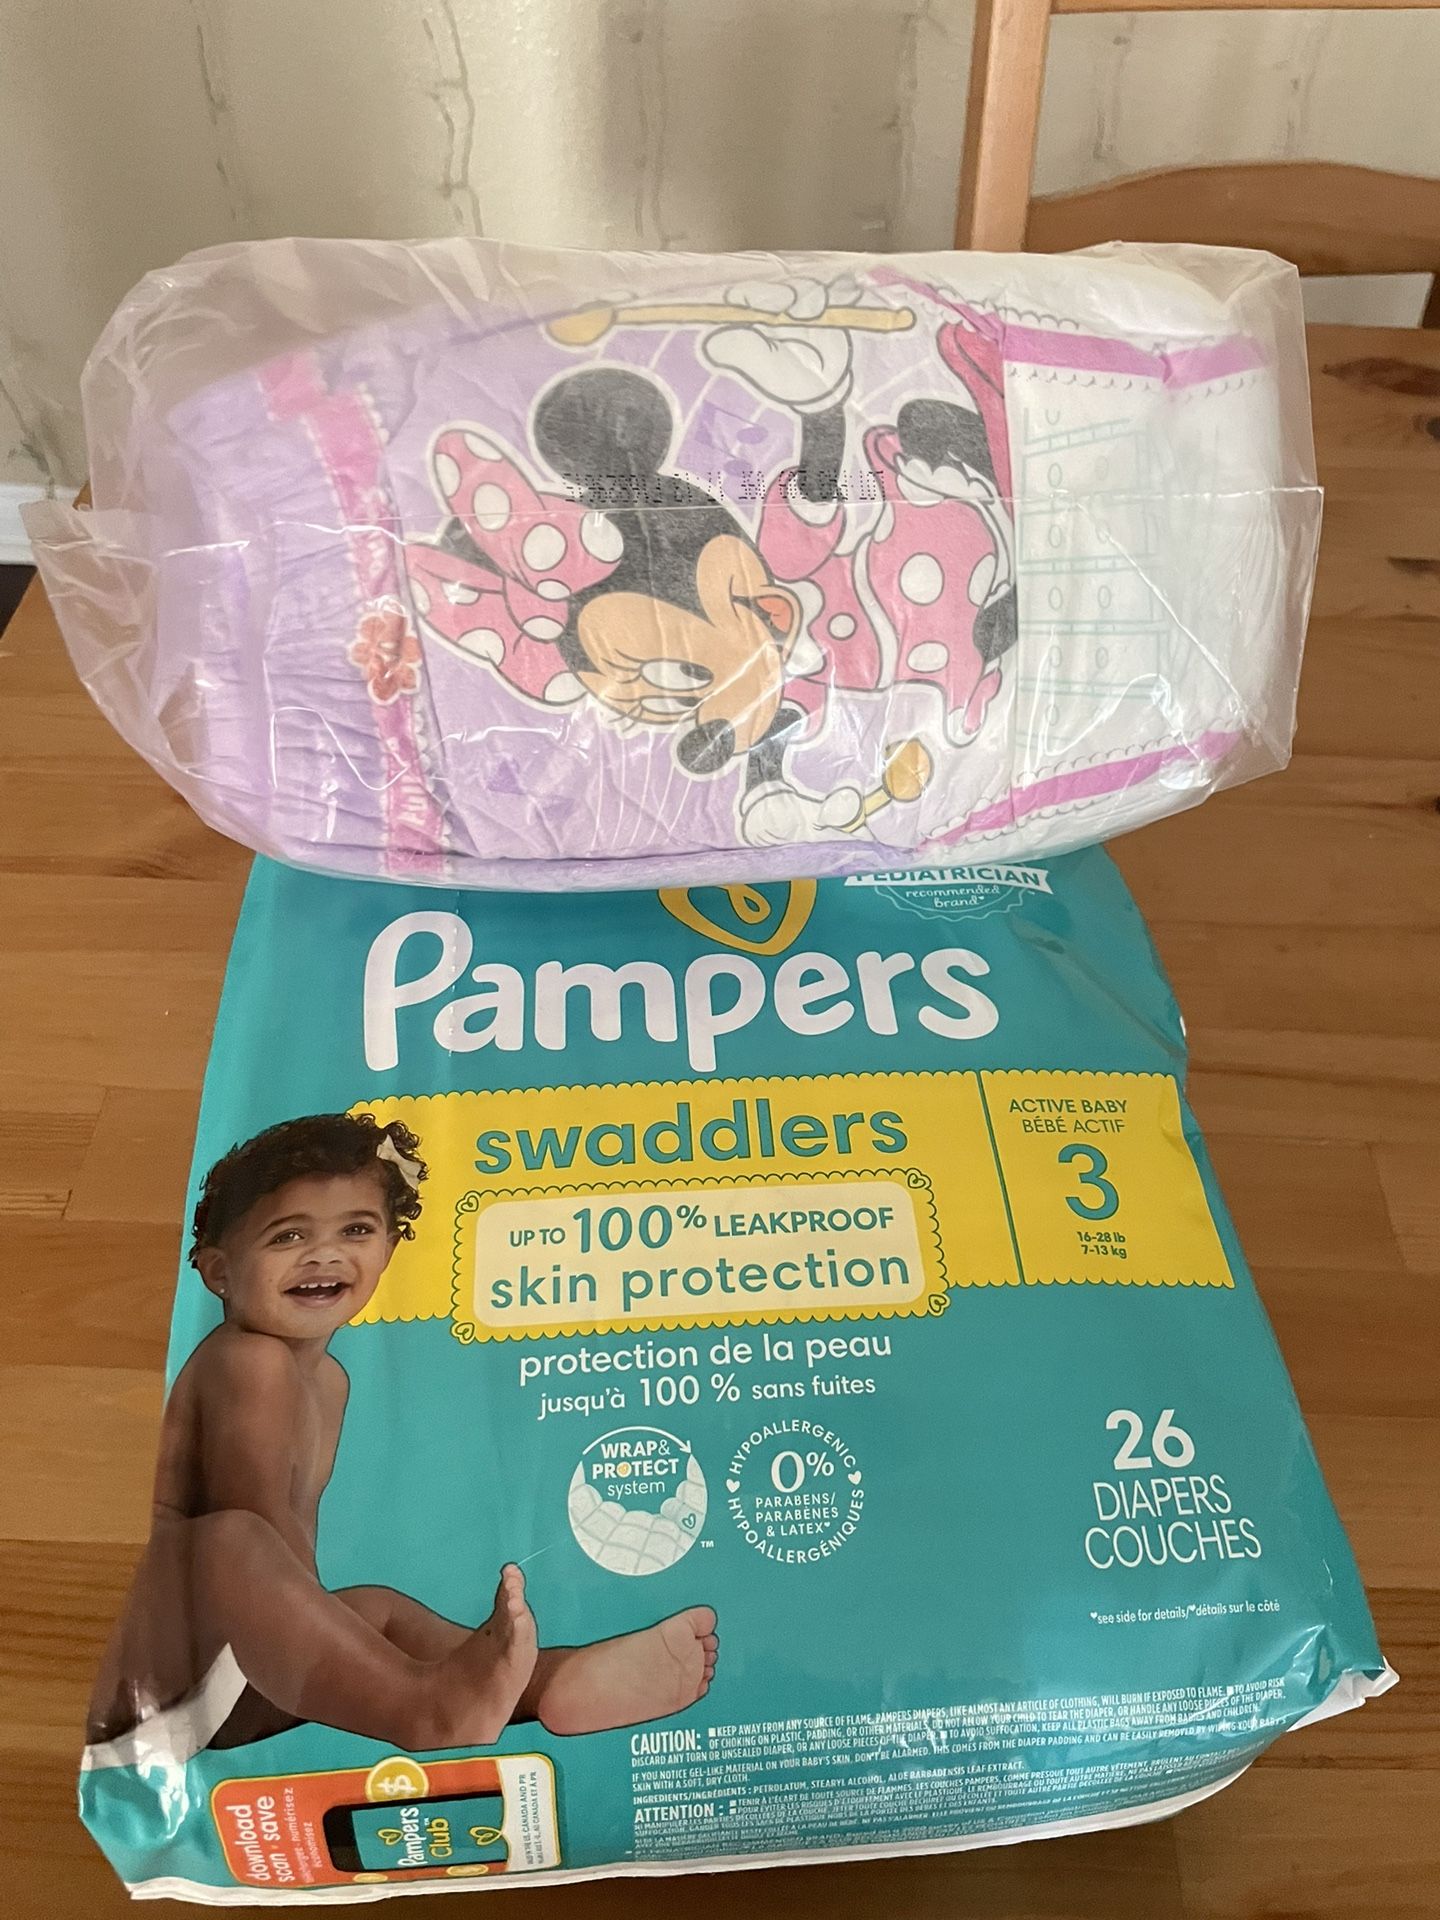 Pampers swaddlers size 3 brand new….. open bag girls pull ups size 4T-5T 21 count